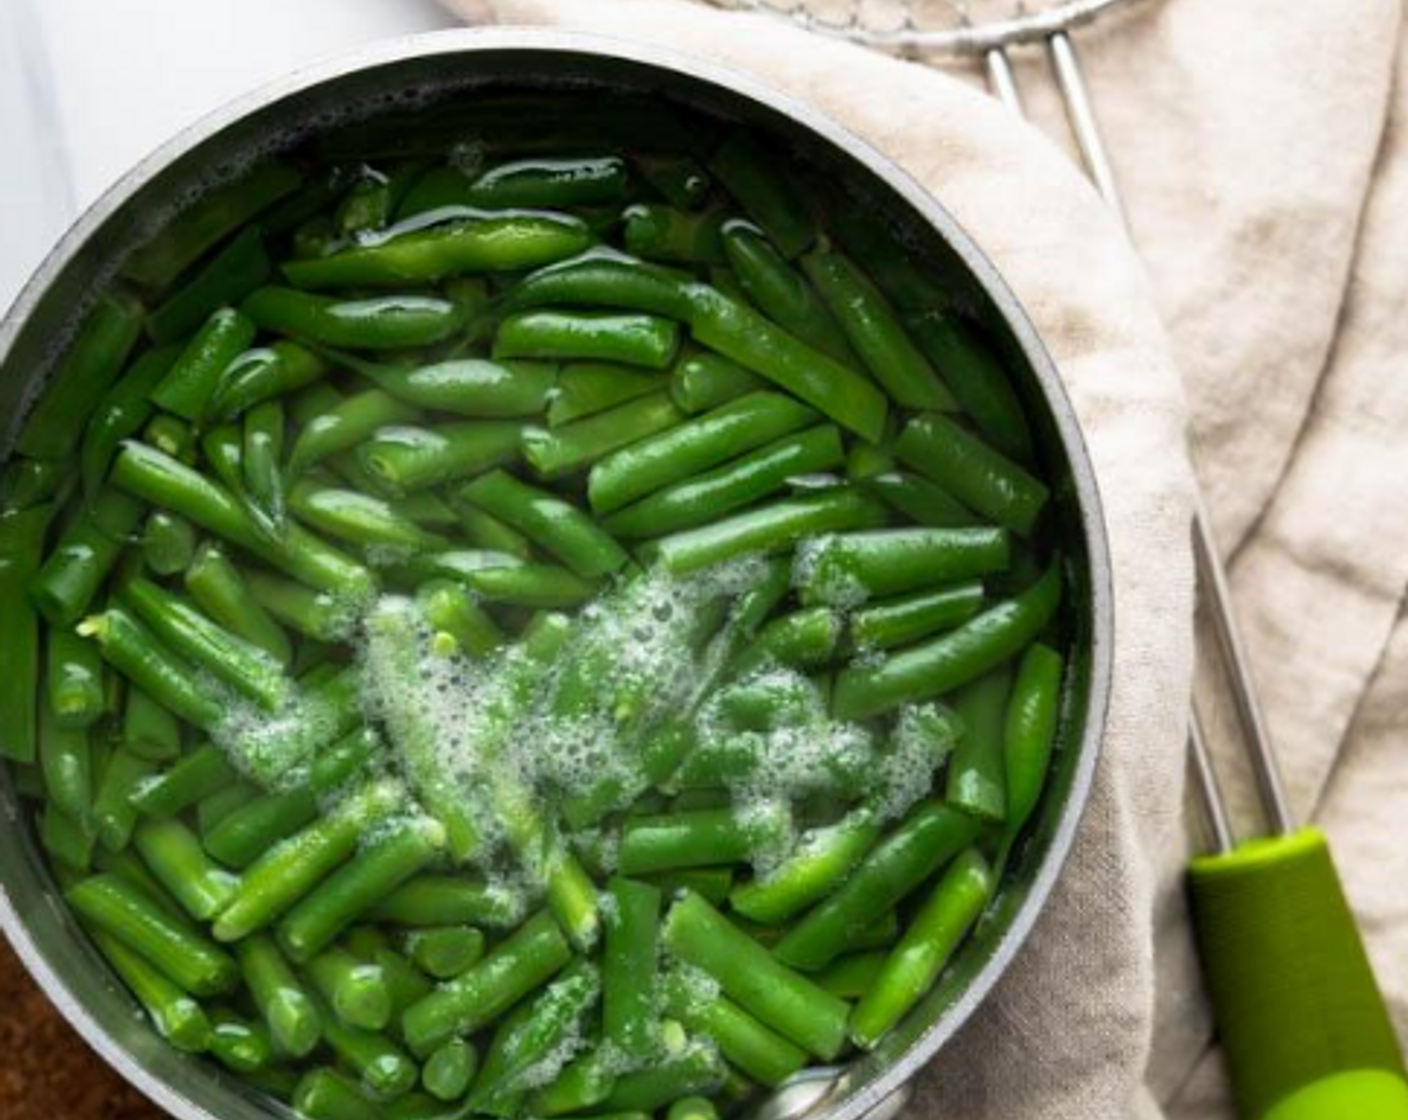 step 4 Bring a small pan of water to a boil and while the water heats, cut the beans into 1” pieces. Add 1 teaspoon of Salt (1 tsp) to the water once it boils and then add the Green Beans (2 cups). Cook the beans for 3-4 minutes or until crisp-tender.